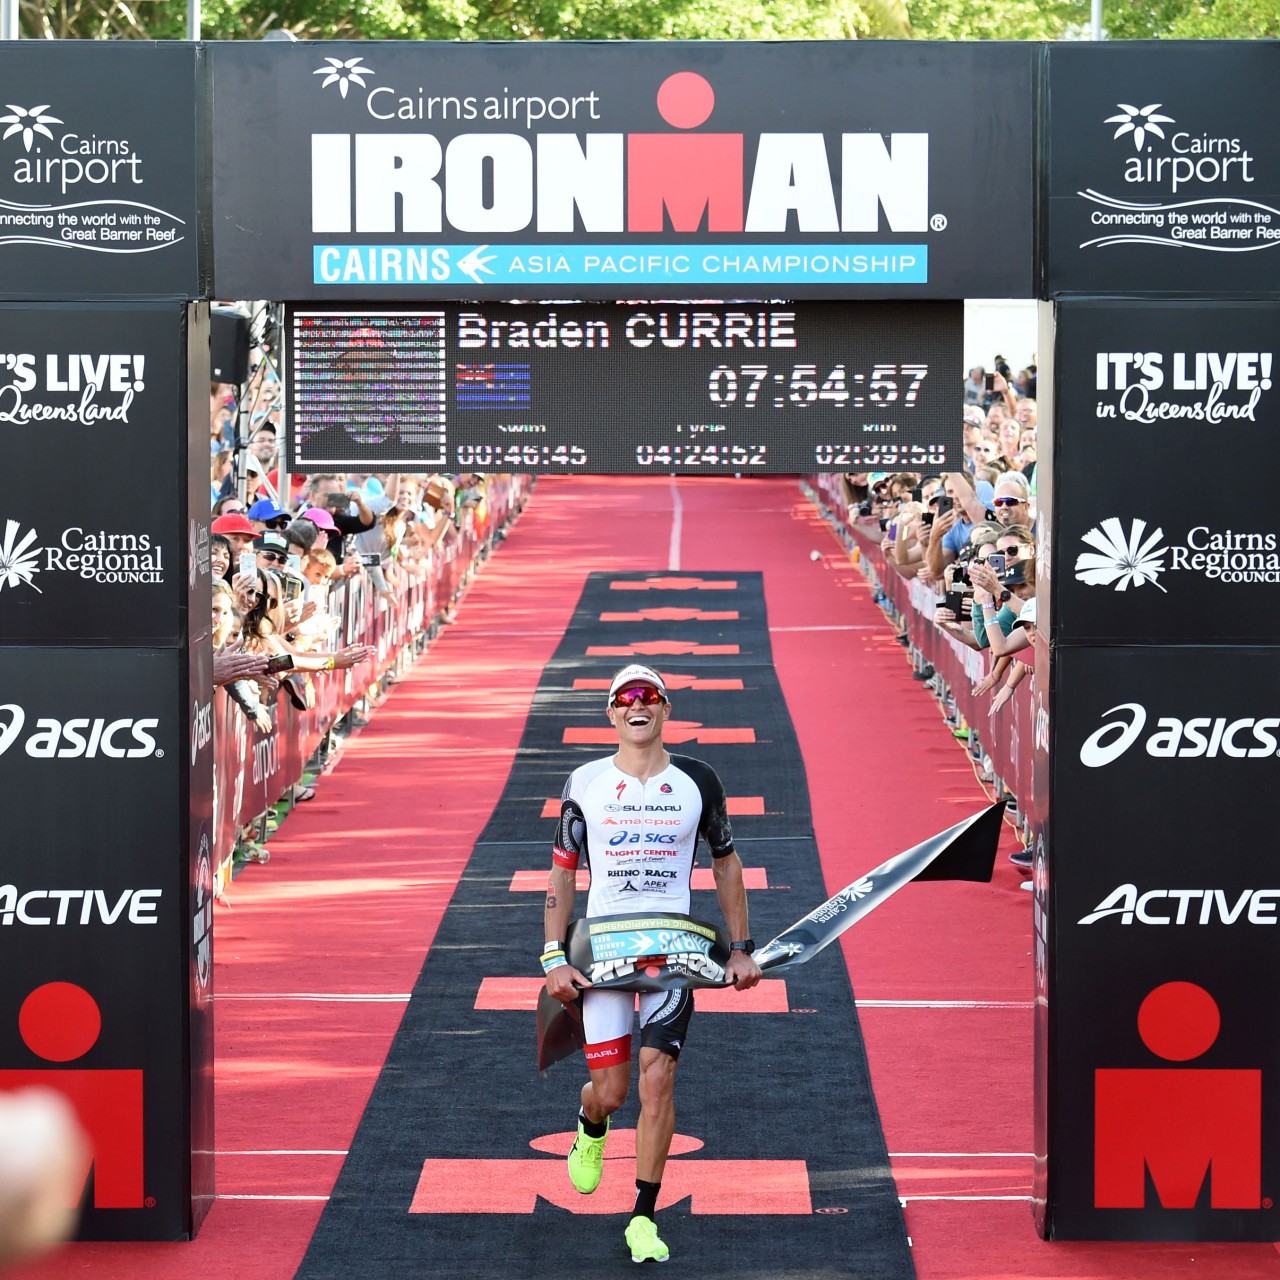 Braden Currie at the finish line as he wins Cairns Ironman 2018. Photo Credit Korupt Vision